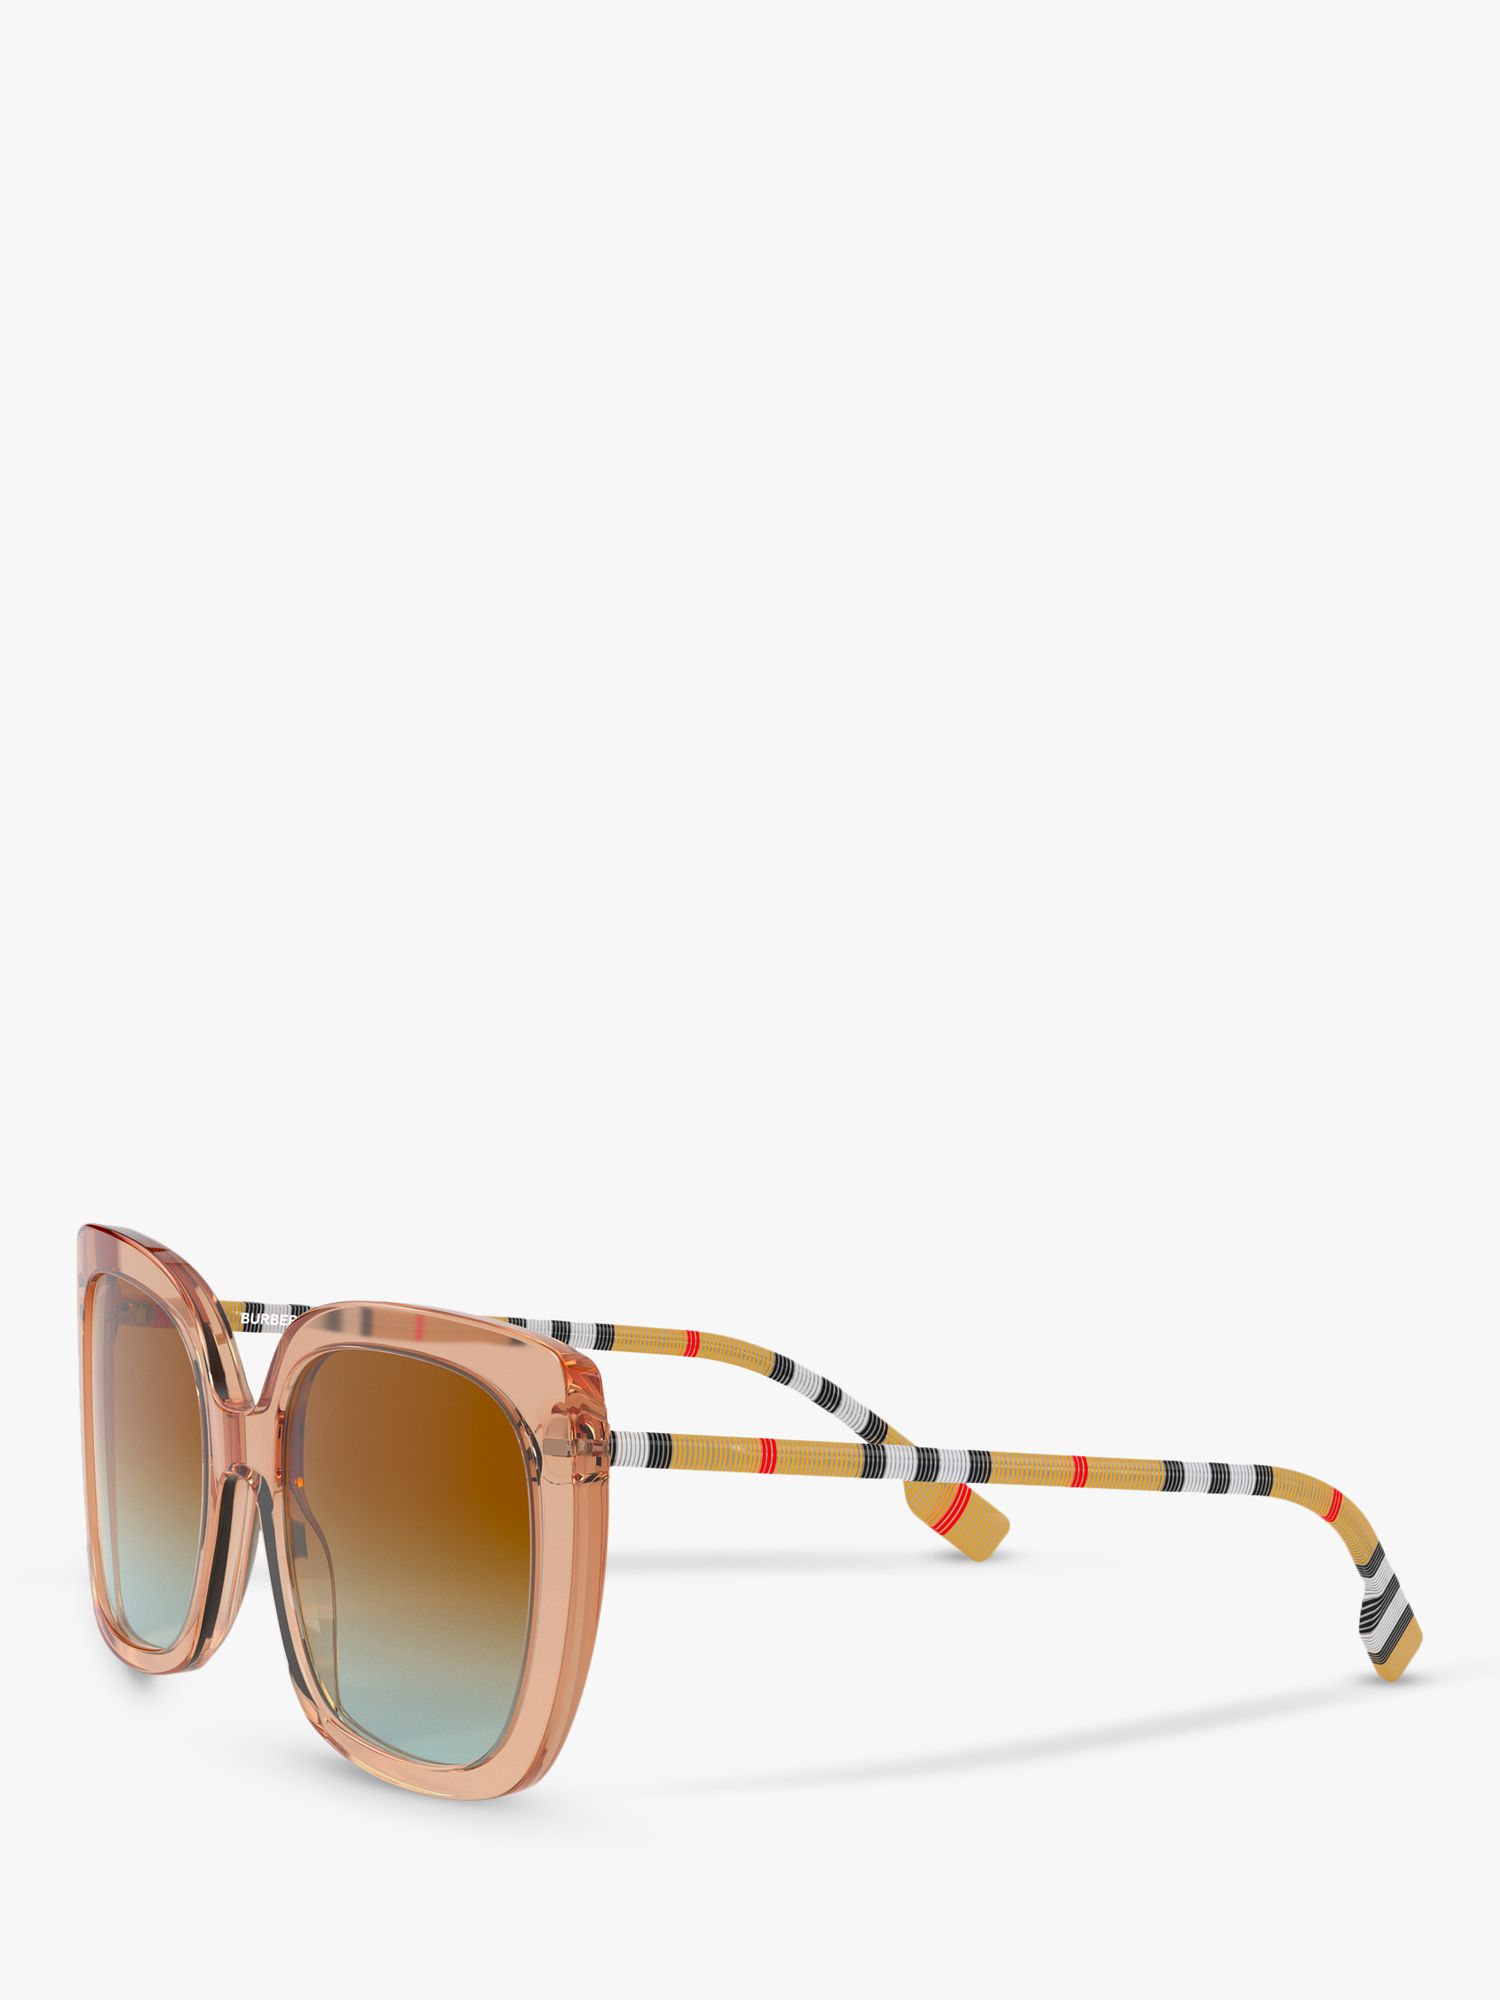 Burberry Be4323 Womens Square Sunglasses Beigebrown Gradient At John Lewis And Partners